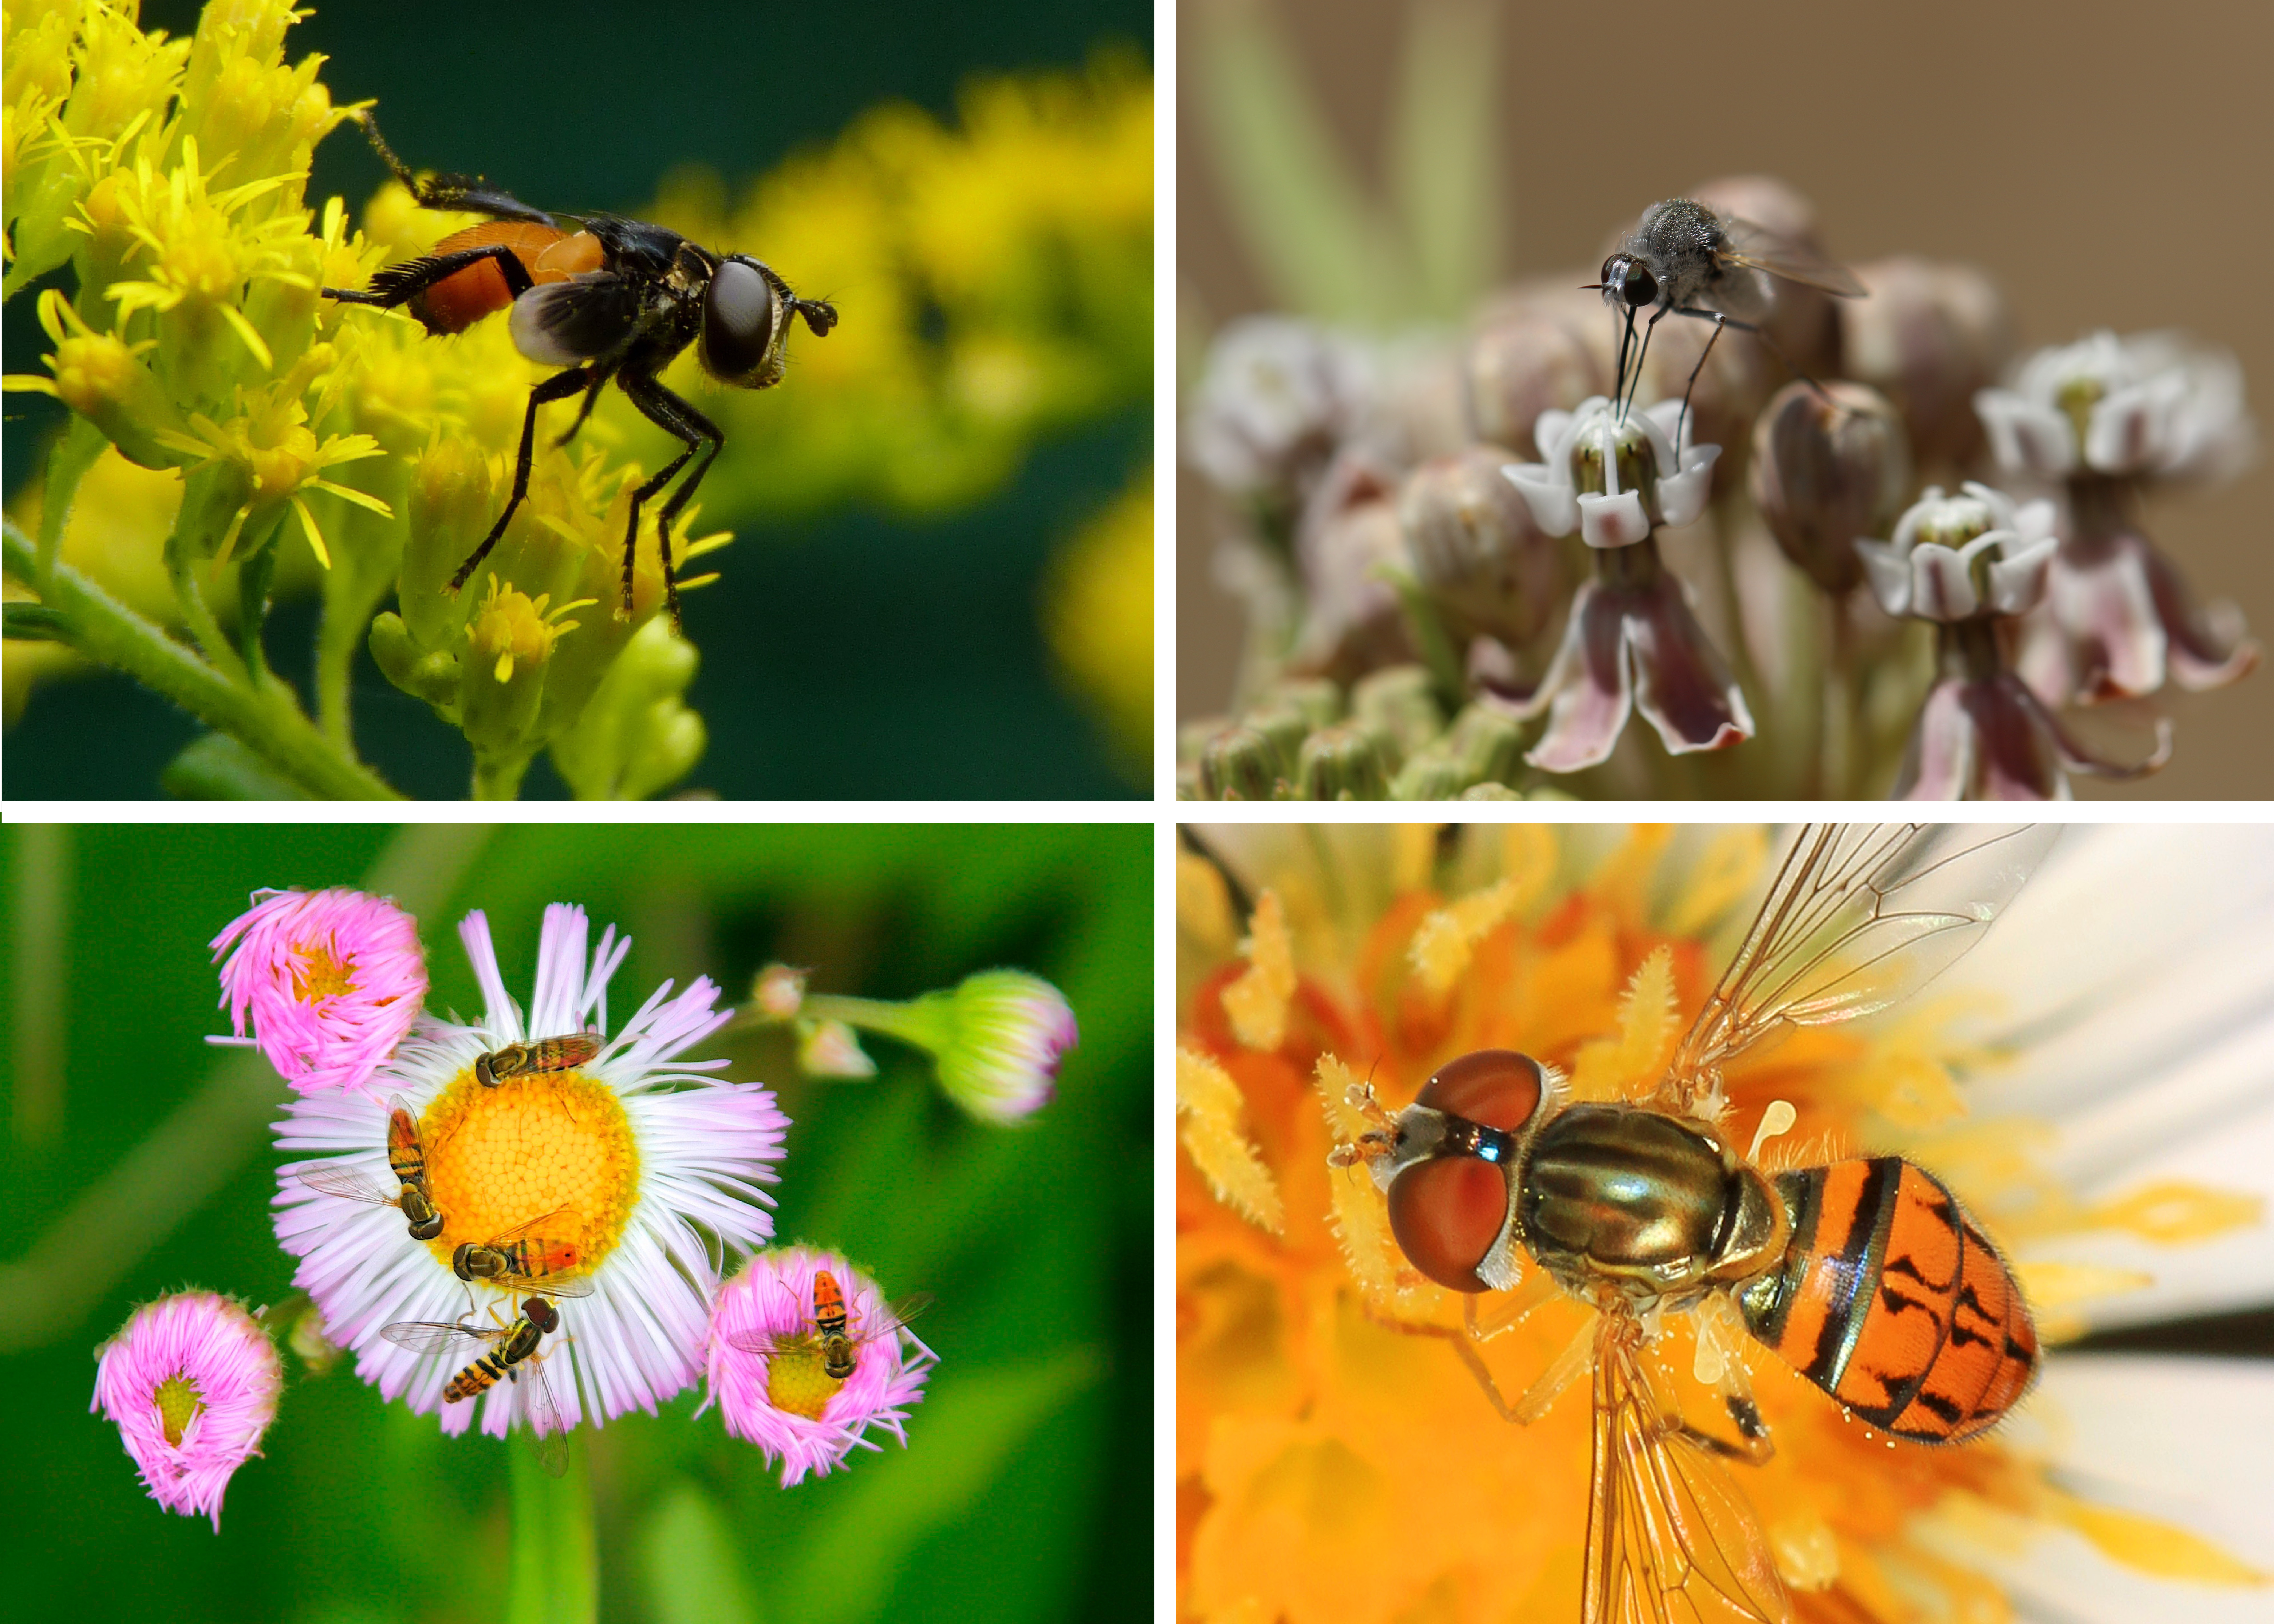 A colorful assortment of fly images demonstrates the diversity of Diptera.